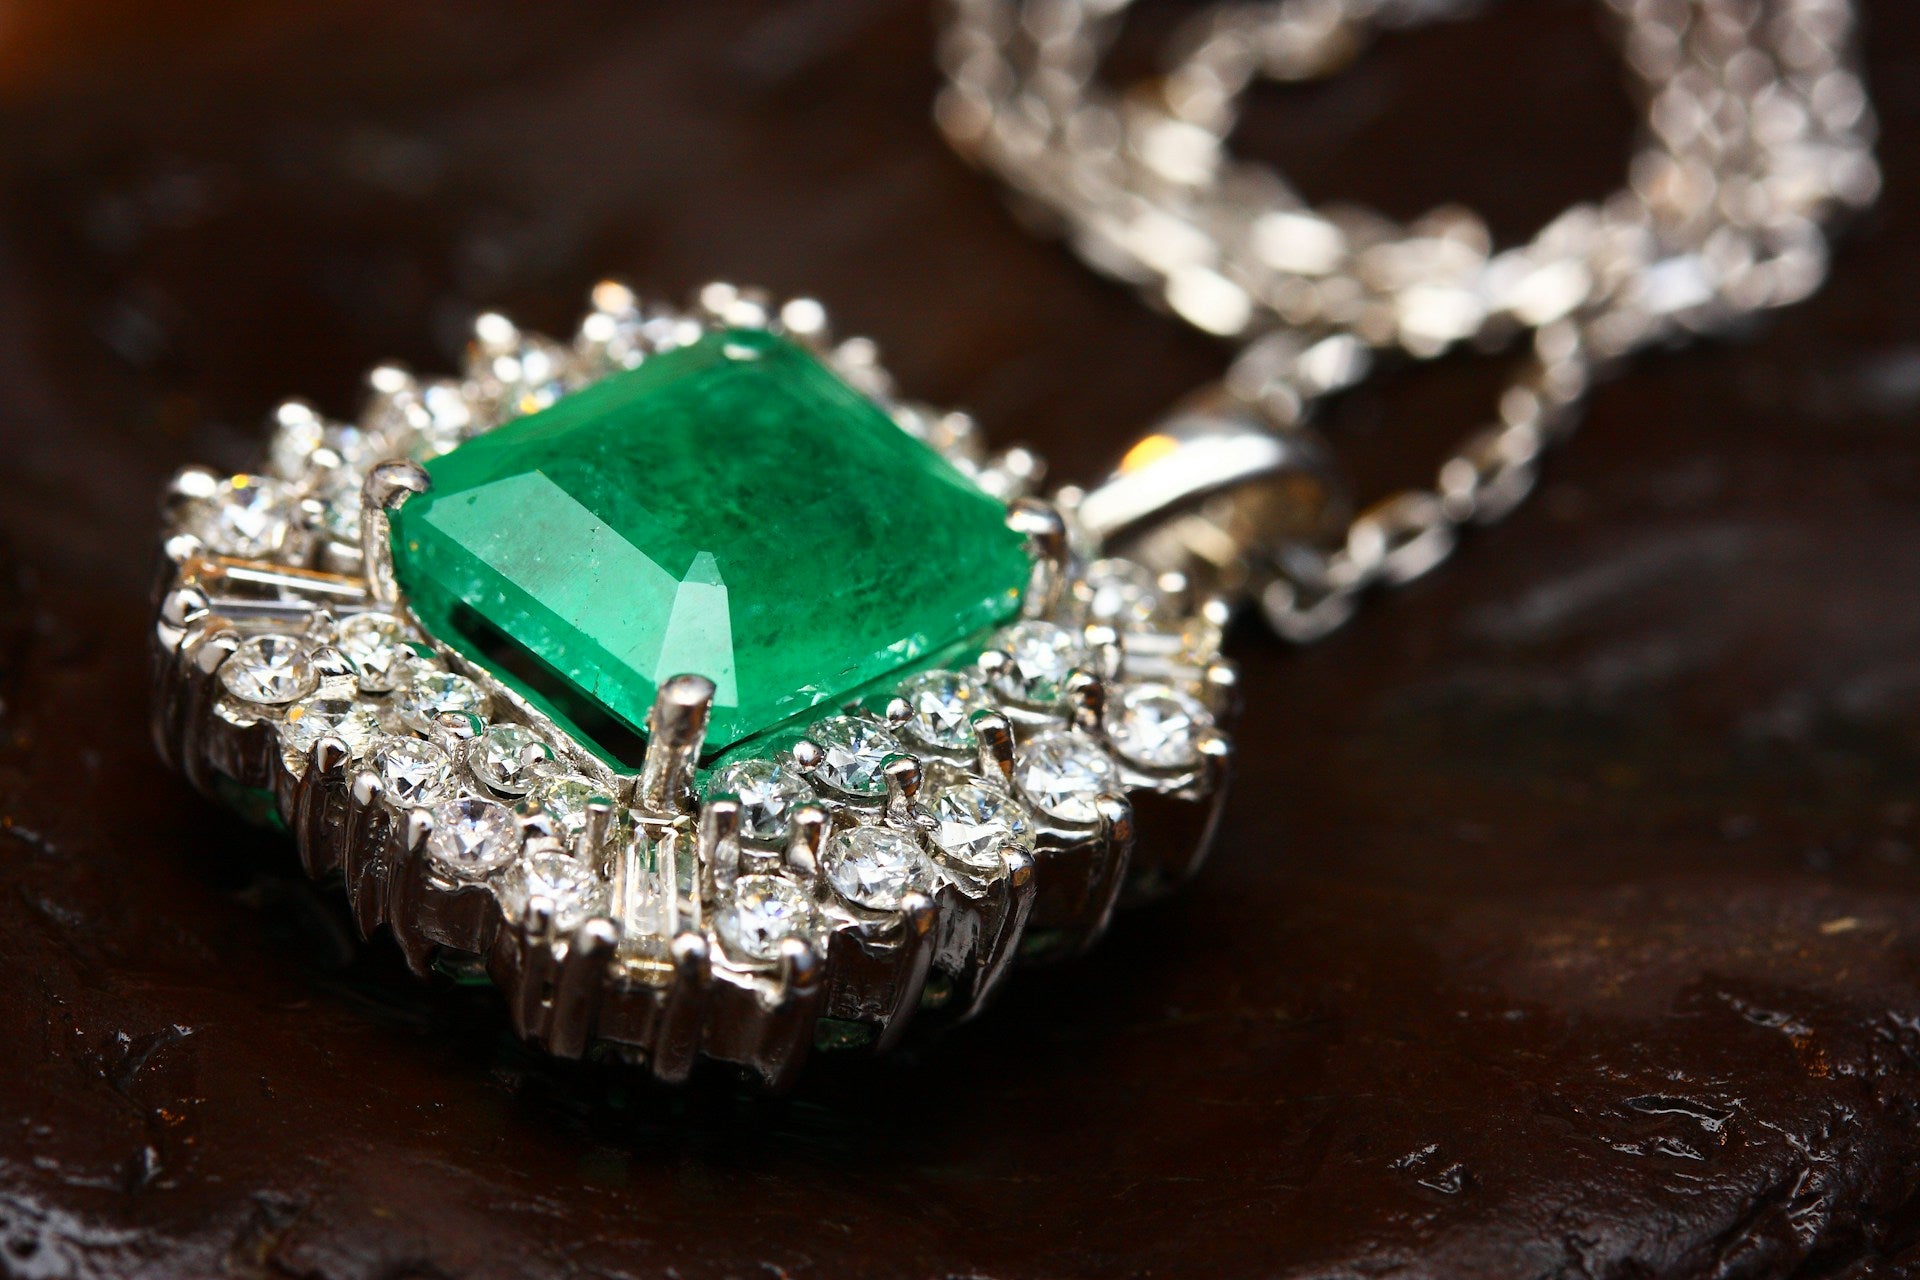 A piece of emerald in a silver amulet